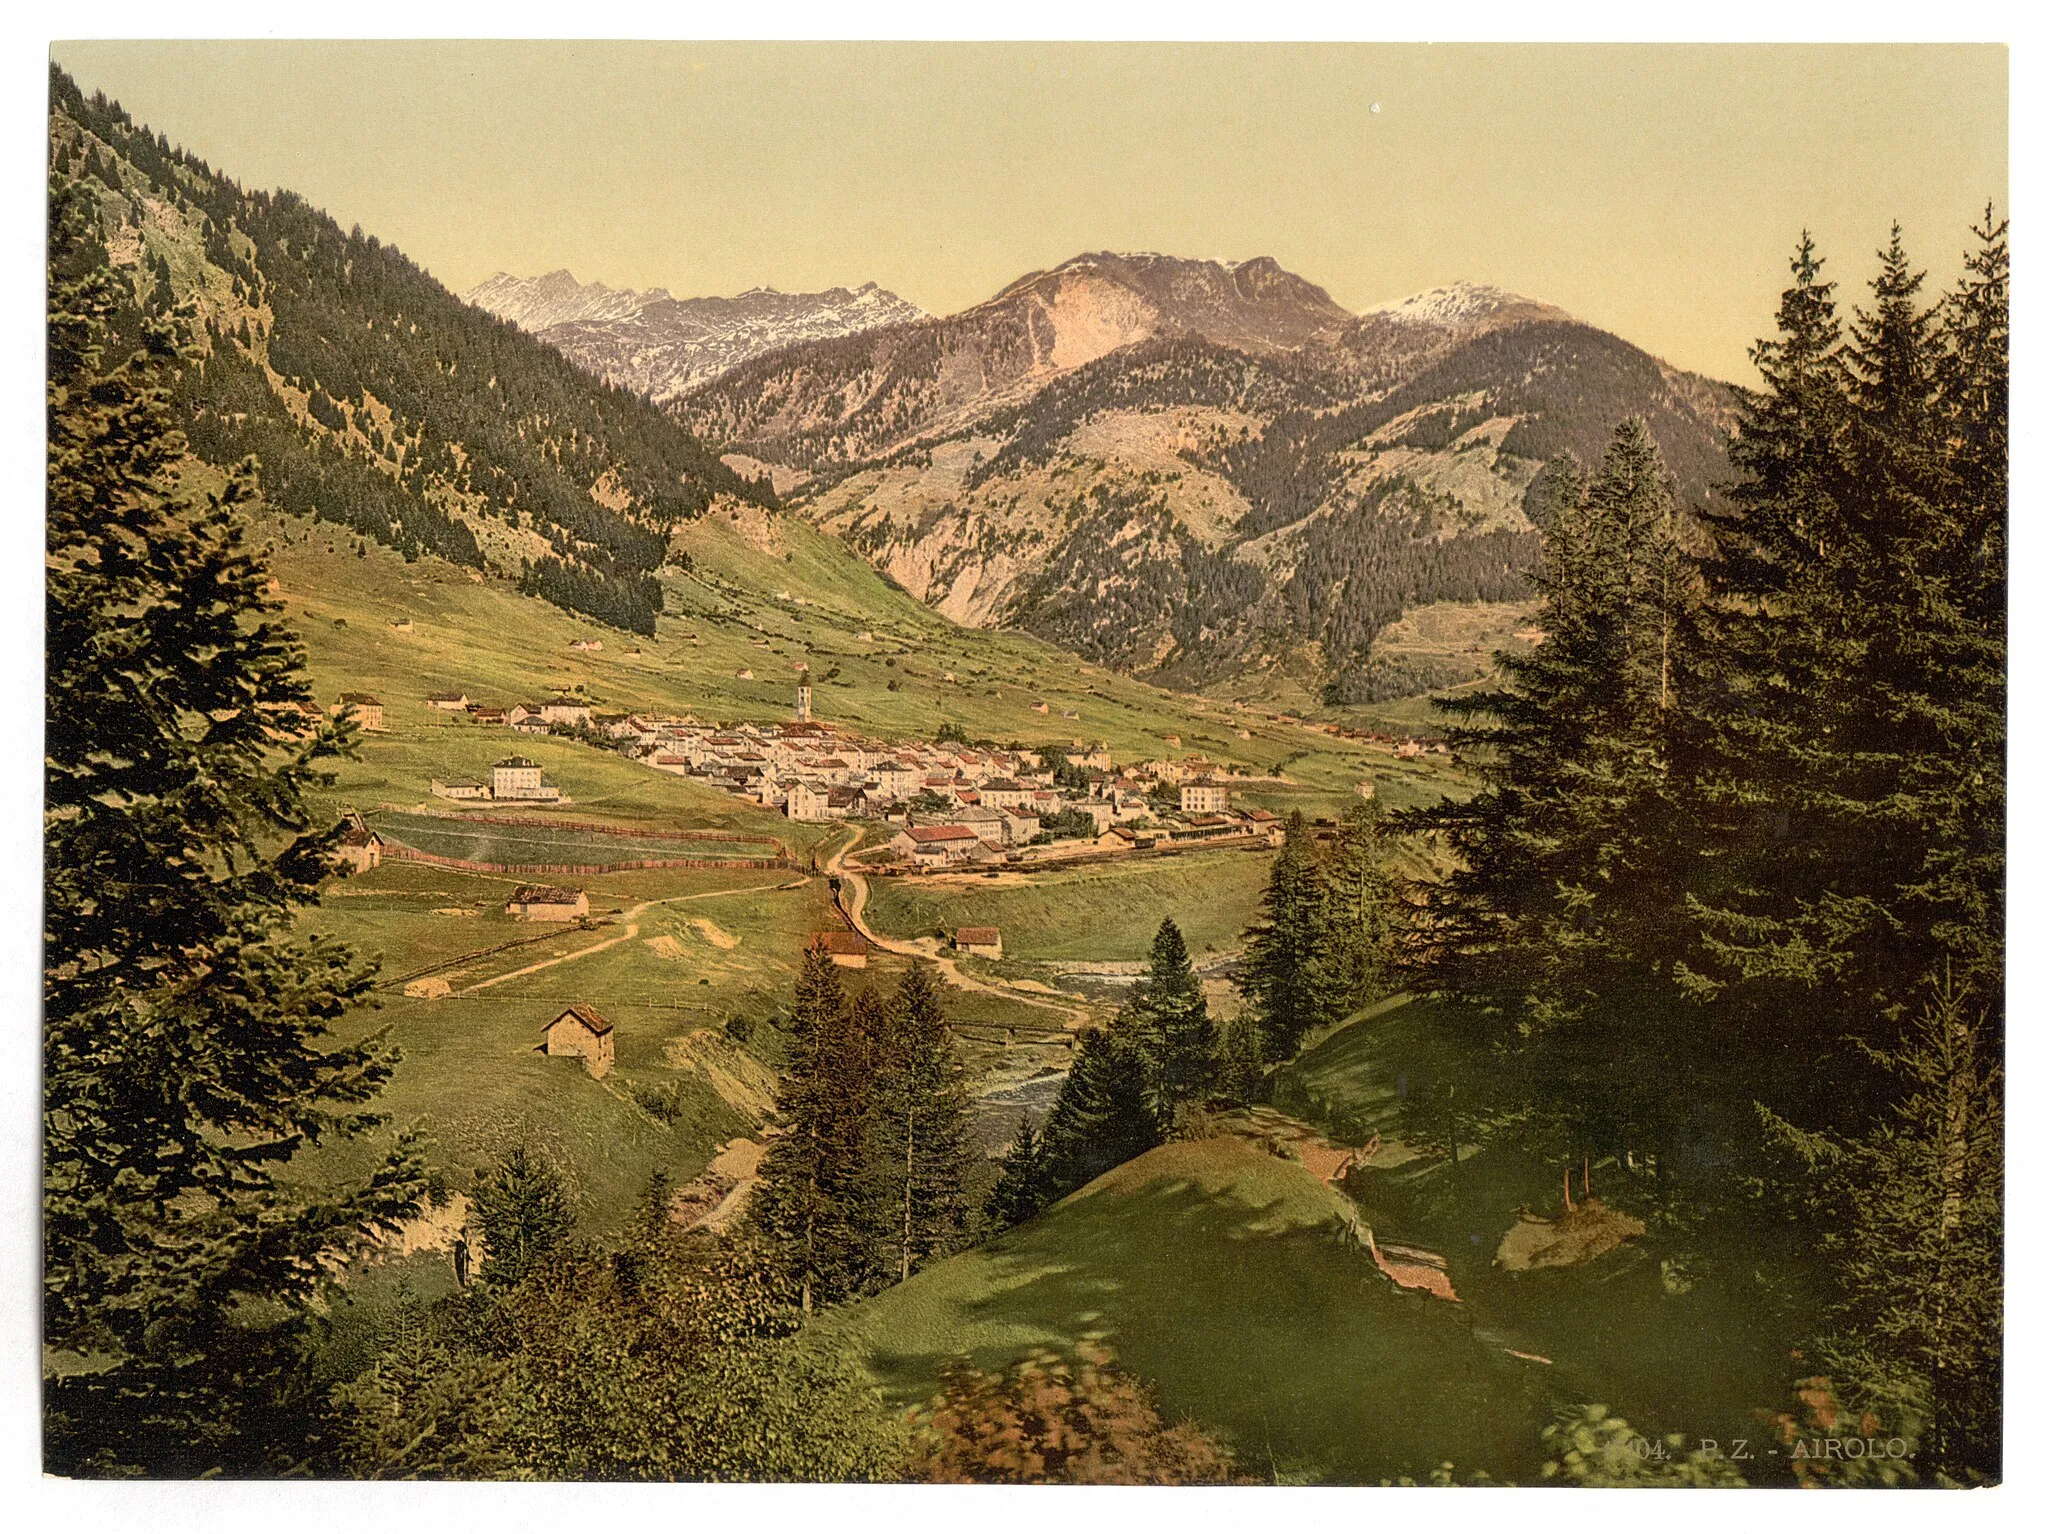 Photo showing: Print no. "17104".; Forms part of: Views of Switzerland in the Photochrom print collection.; Title devised by Library staff.